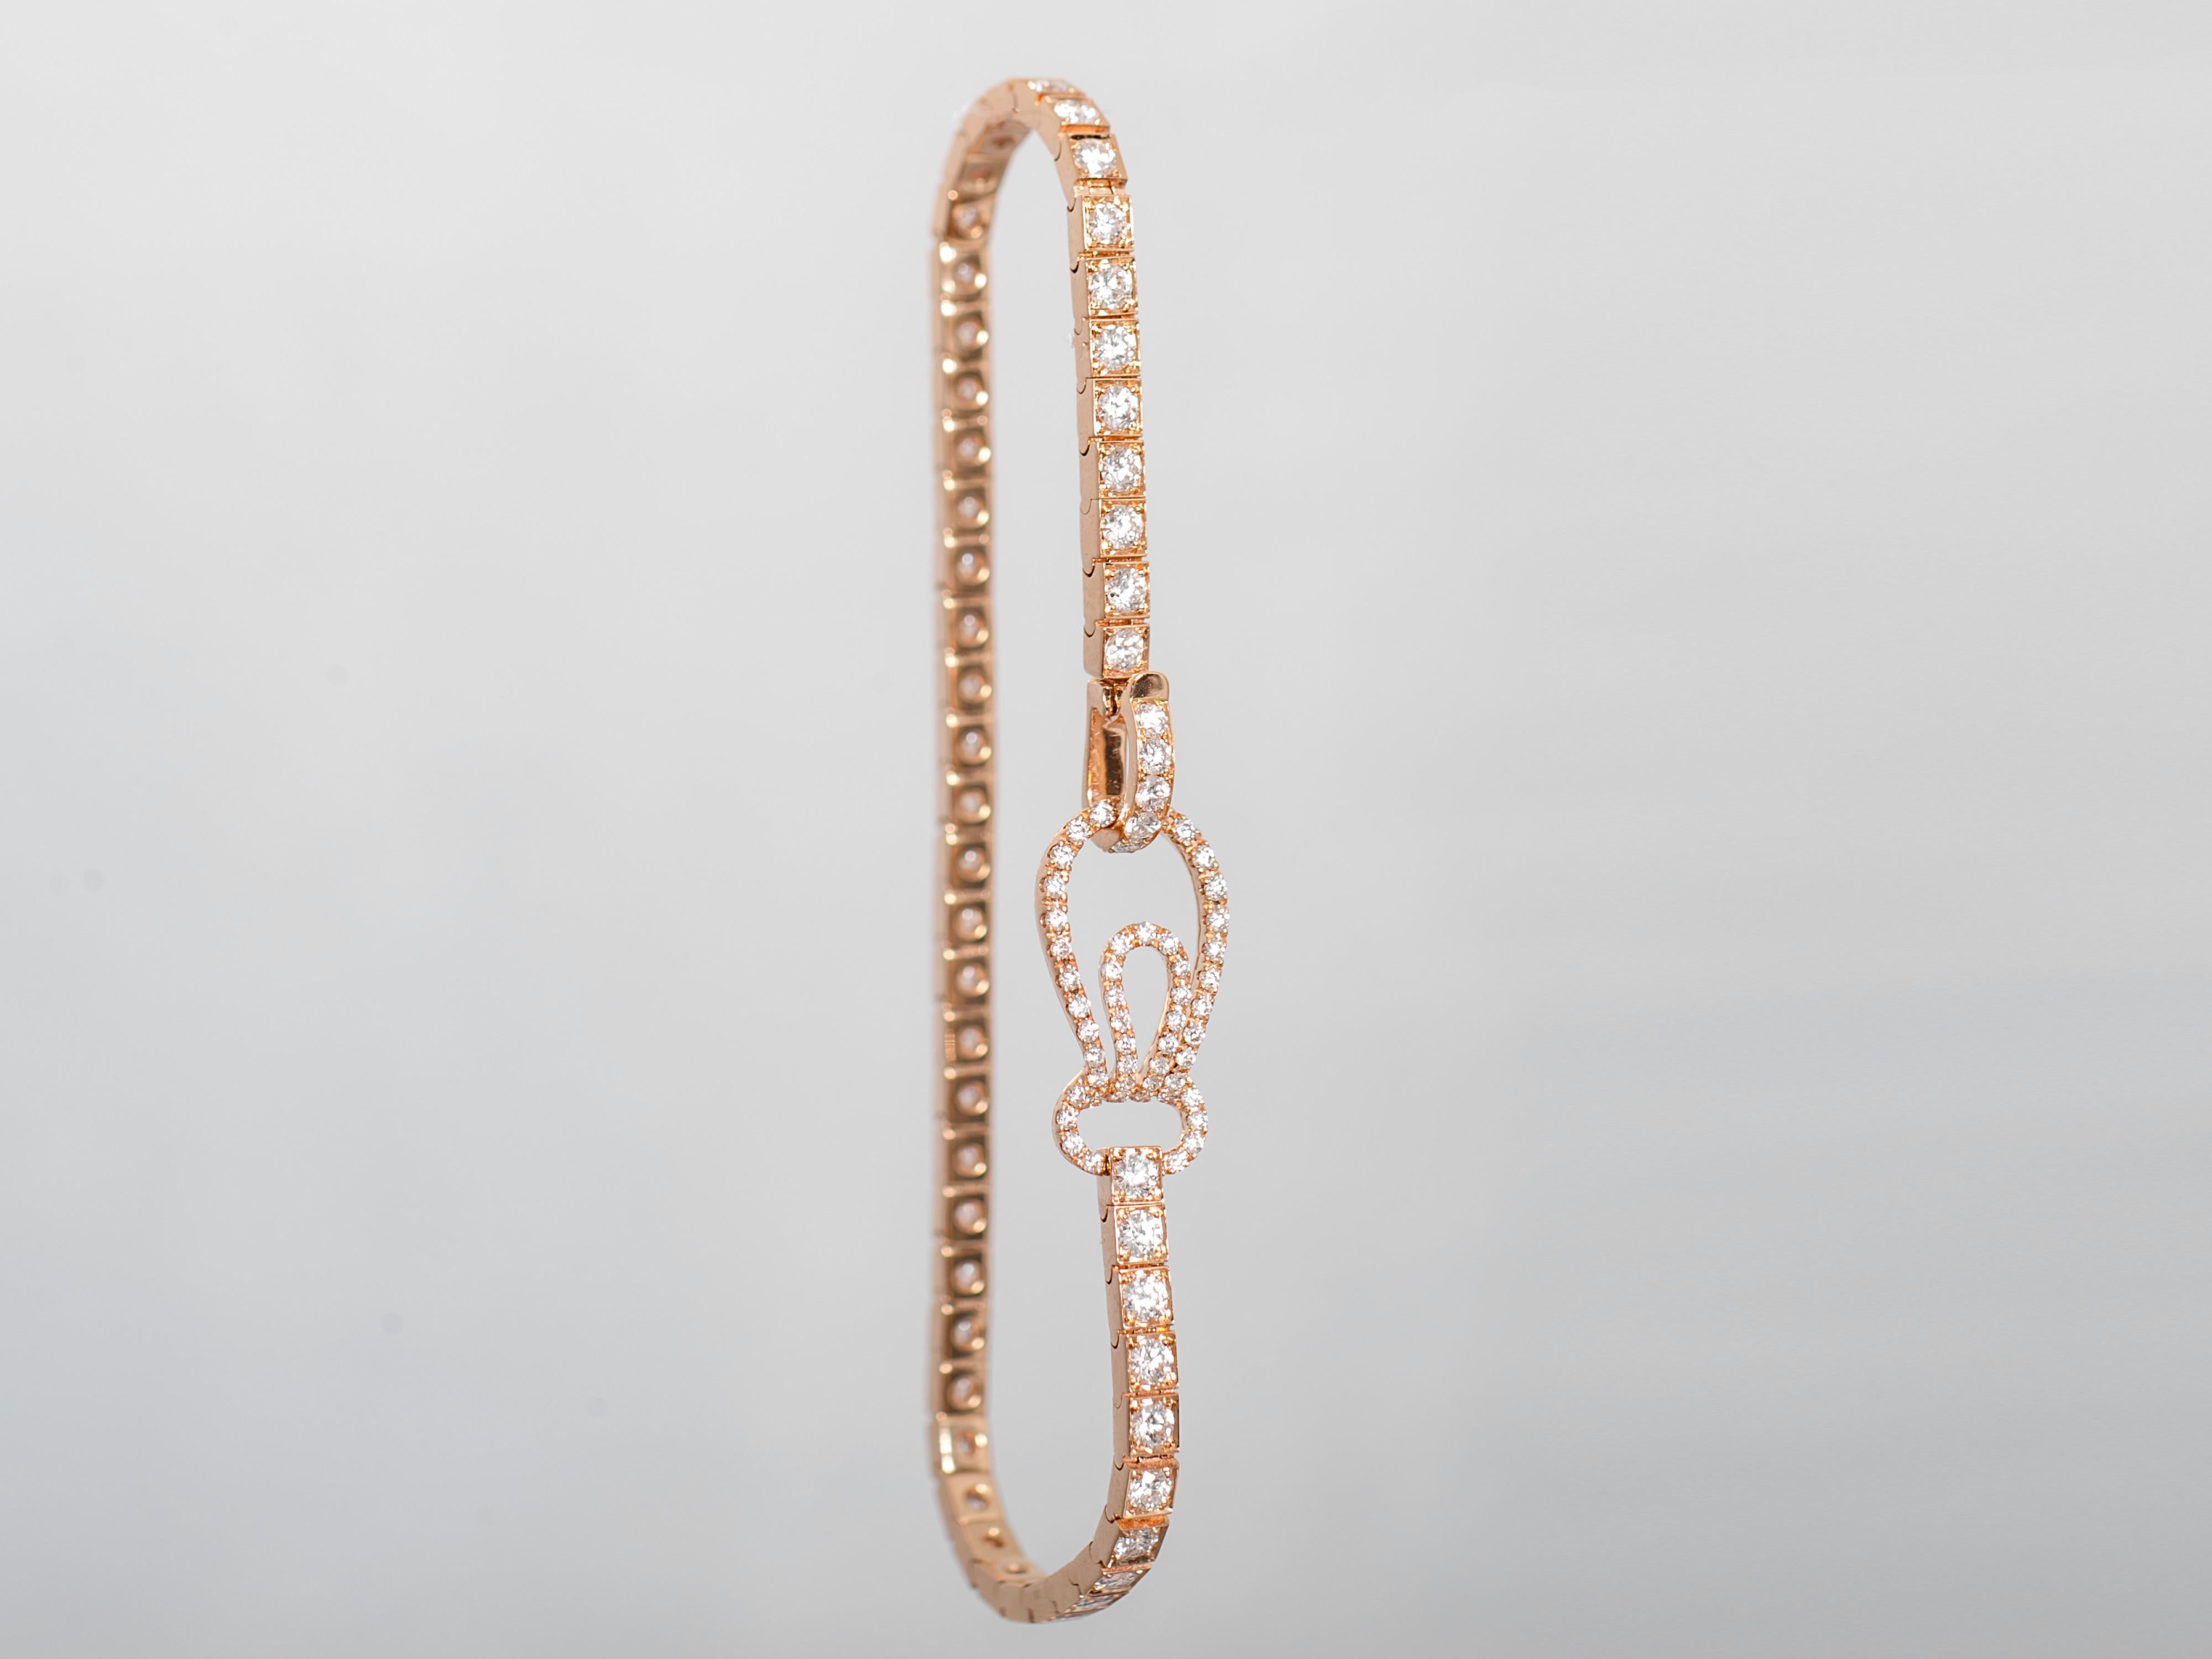 This tennis bracelet is crafted in 18k rose gold and is channel-set with 50 round diamonds. The lock of the bracelet is set with 55 round diamonds and is designed in a shell shape to make it stand out from the ordinary tennis bracelet. 